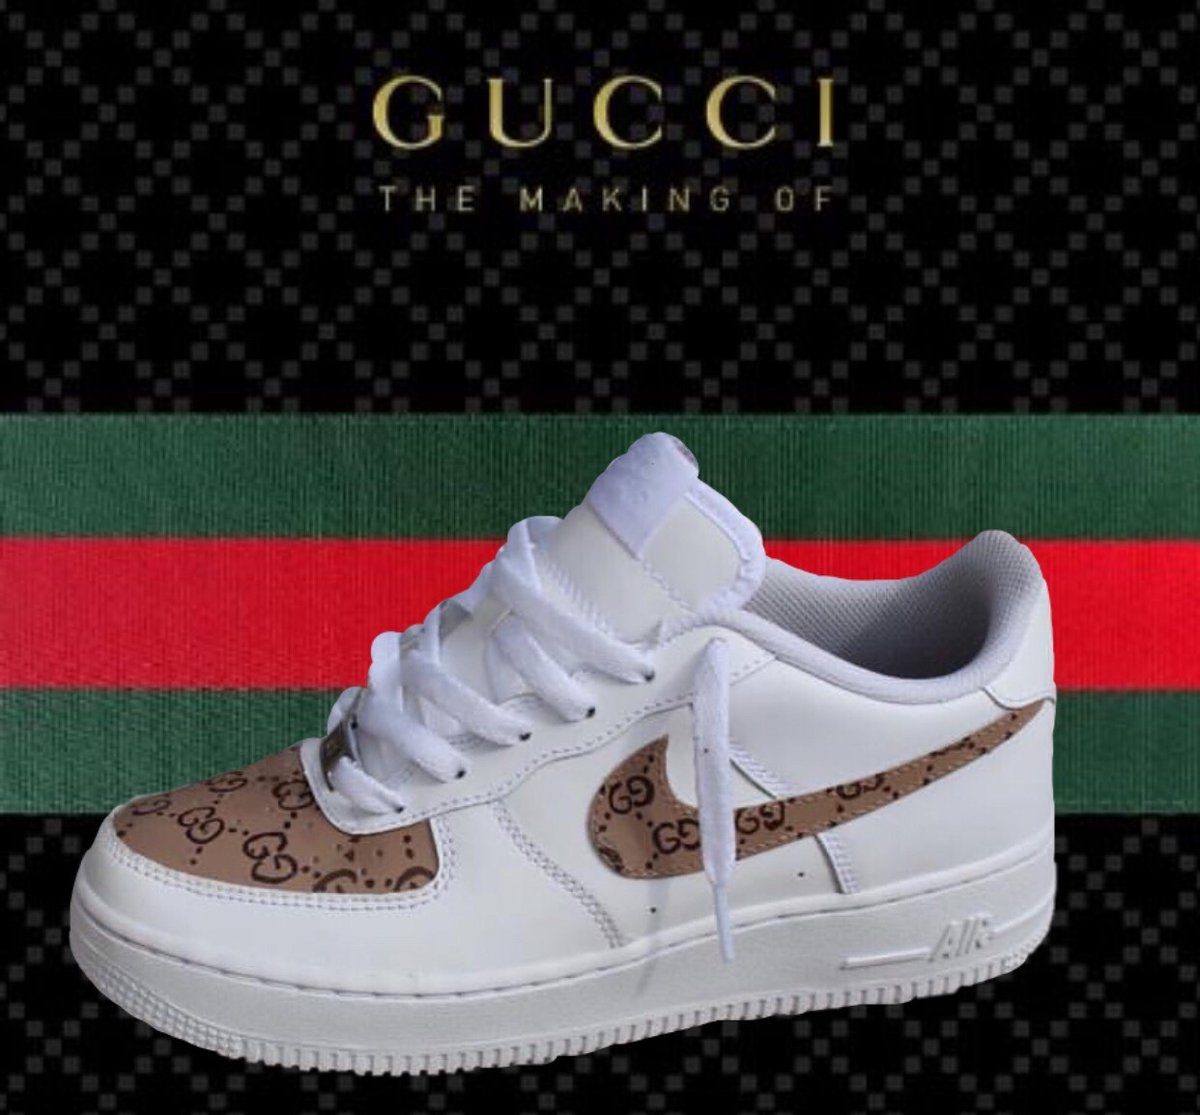 Making Gucci Air Force 1s 